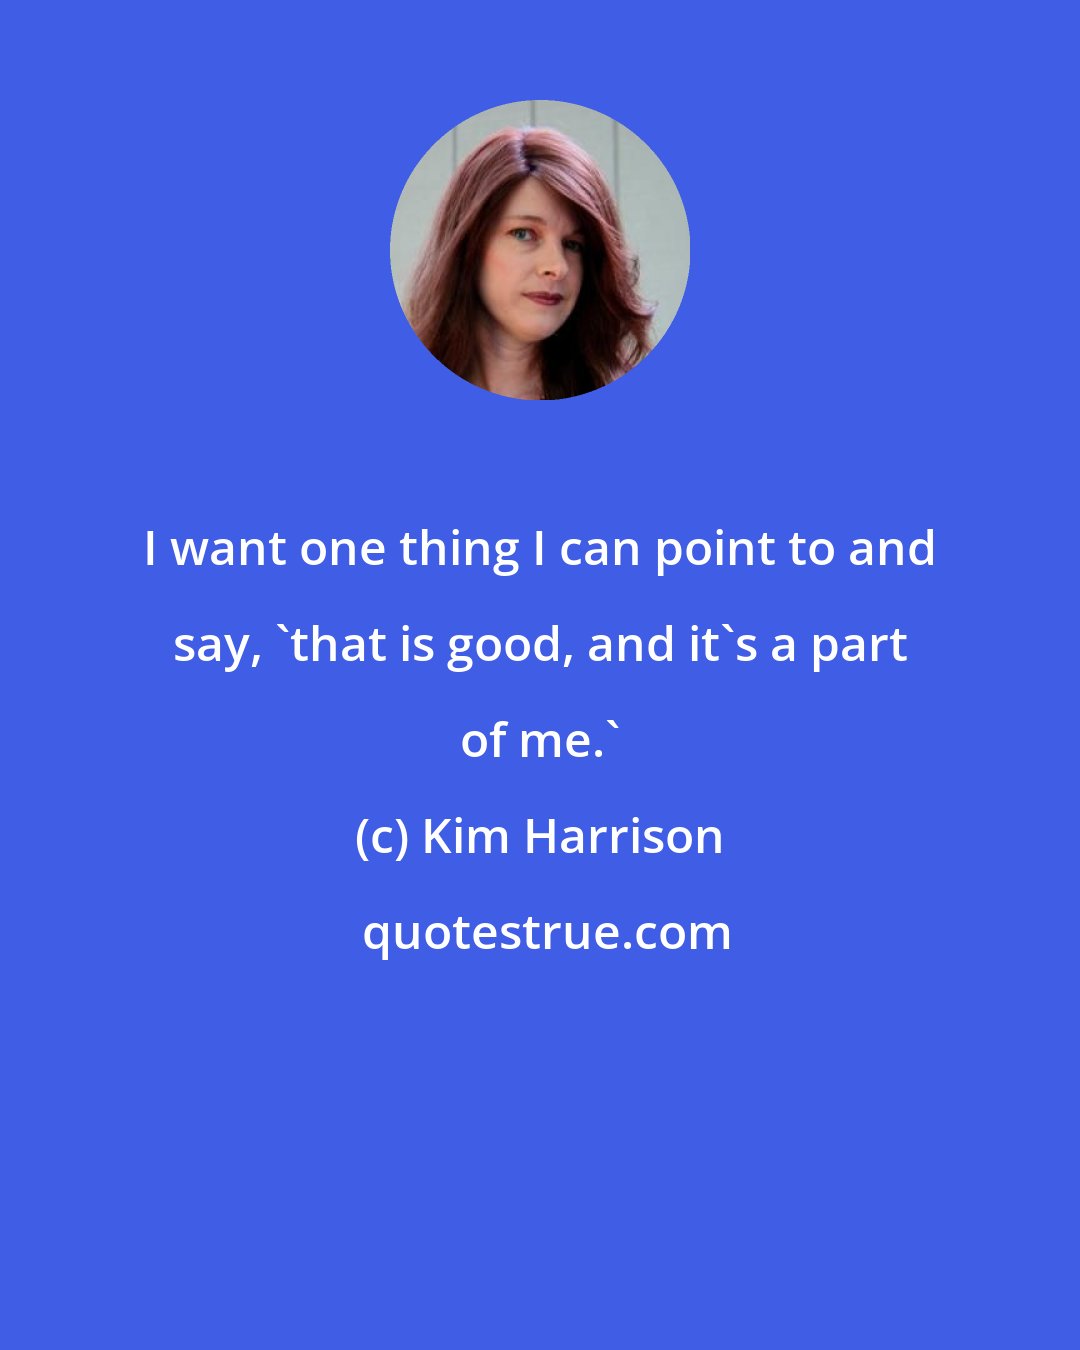 Kim Harrison: I want one thing I can point to and say, 'that is good, and it's a part of me.'